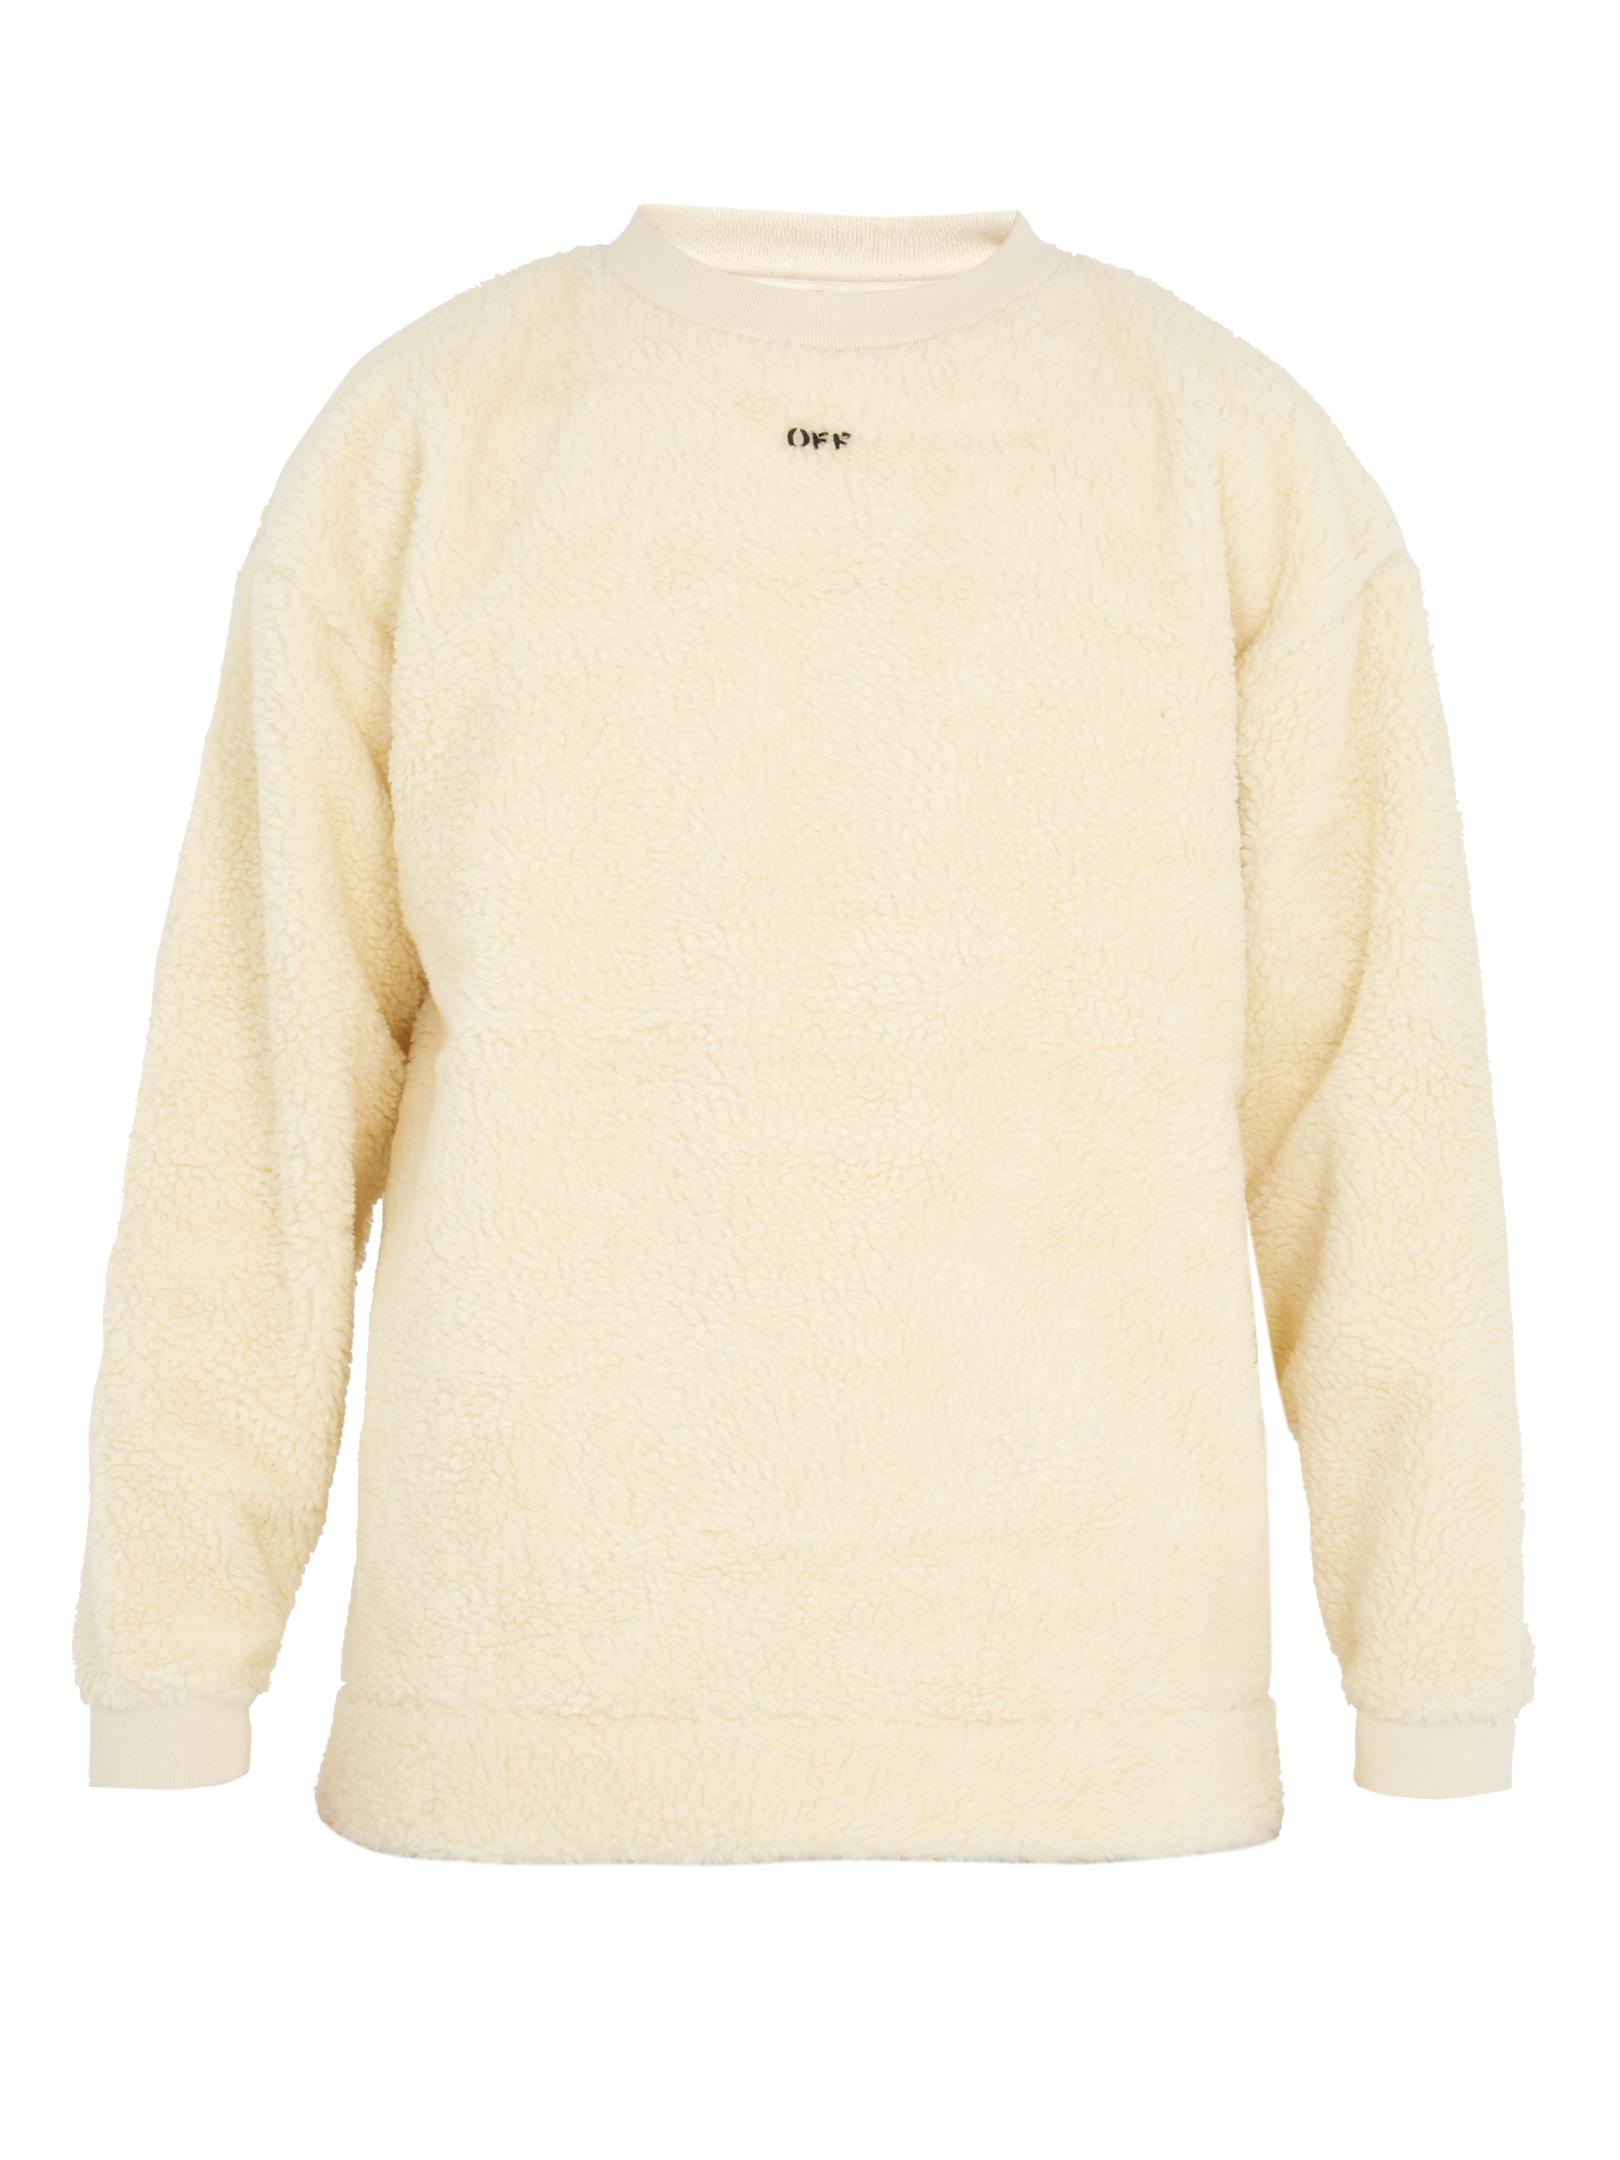 Off-White c/o Virgil Abloh Text-print Faux-shearling Sweatshirt in Natural  for Men | Lyst